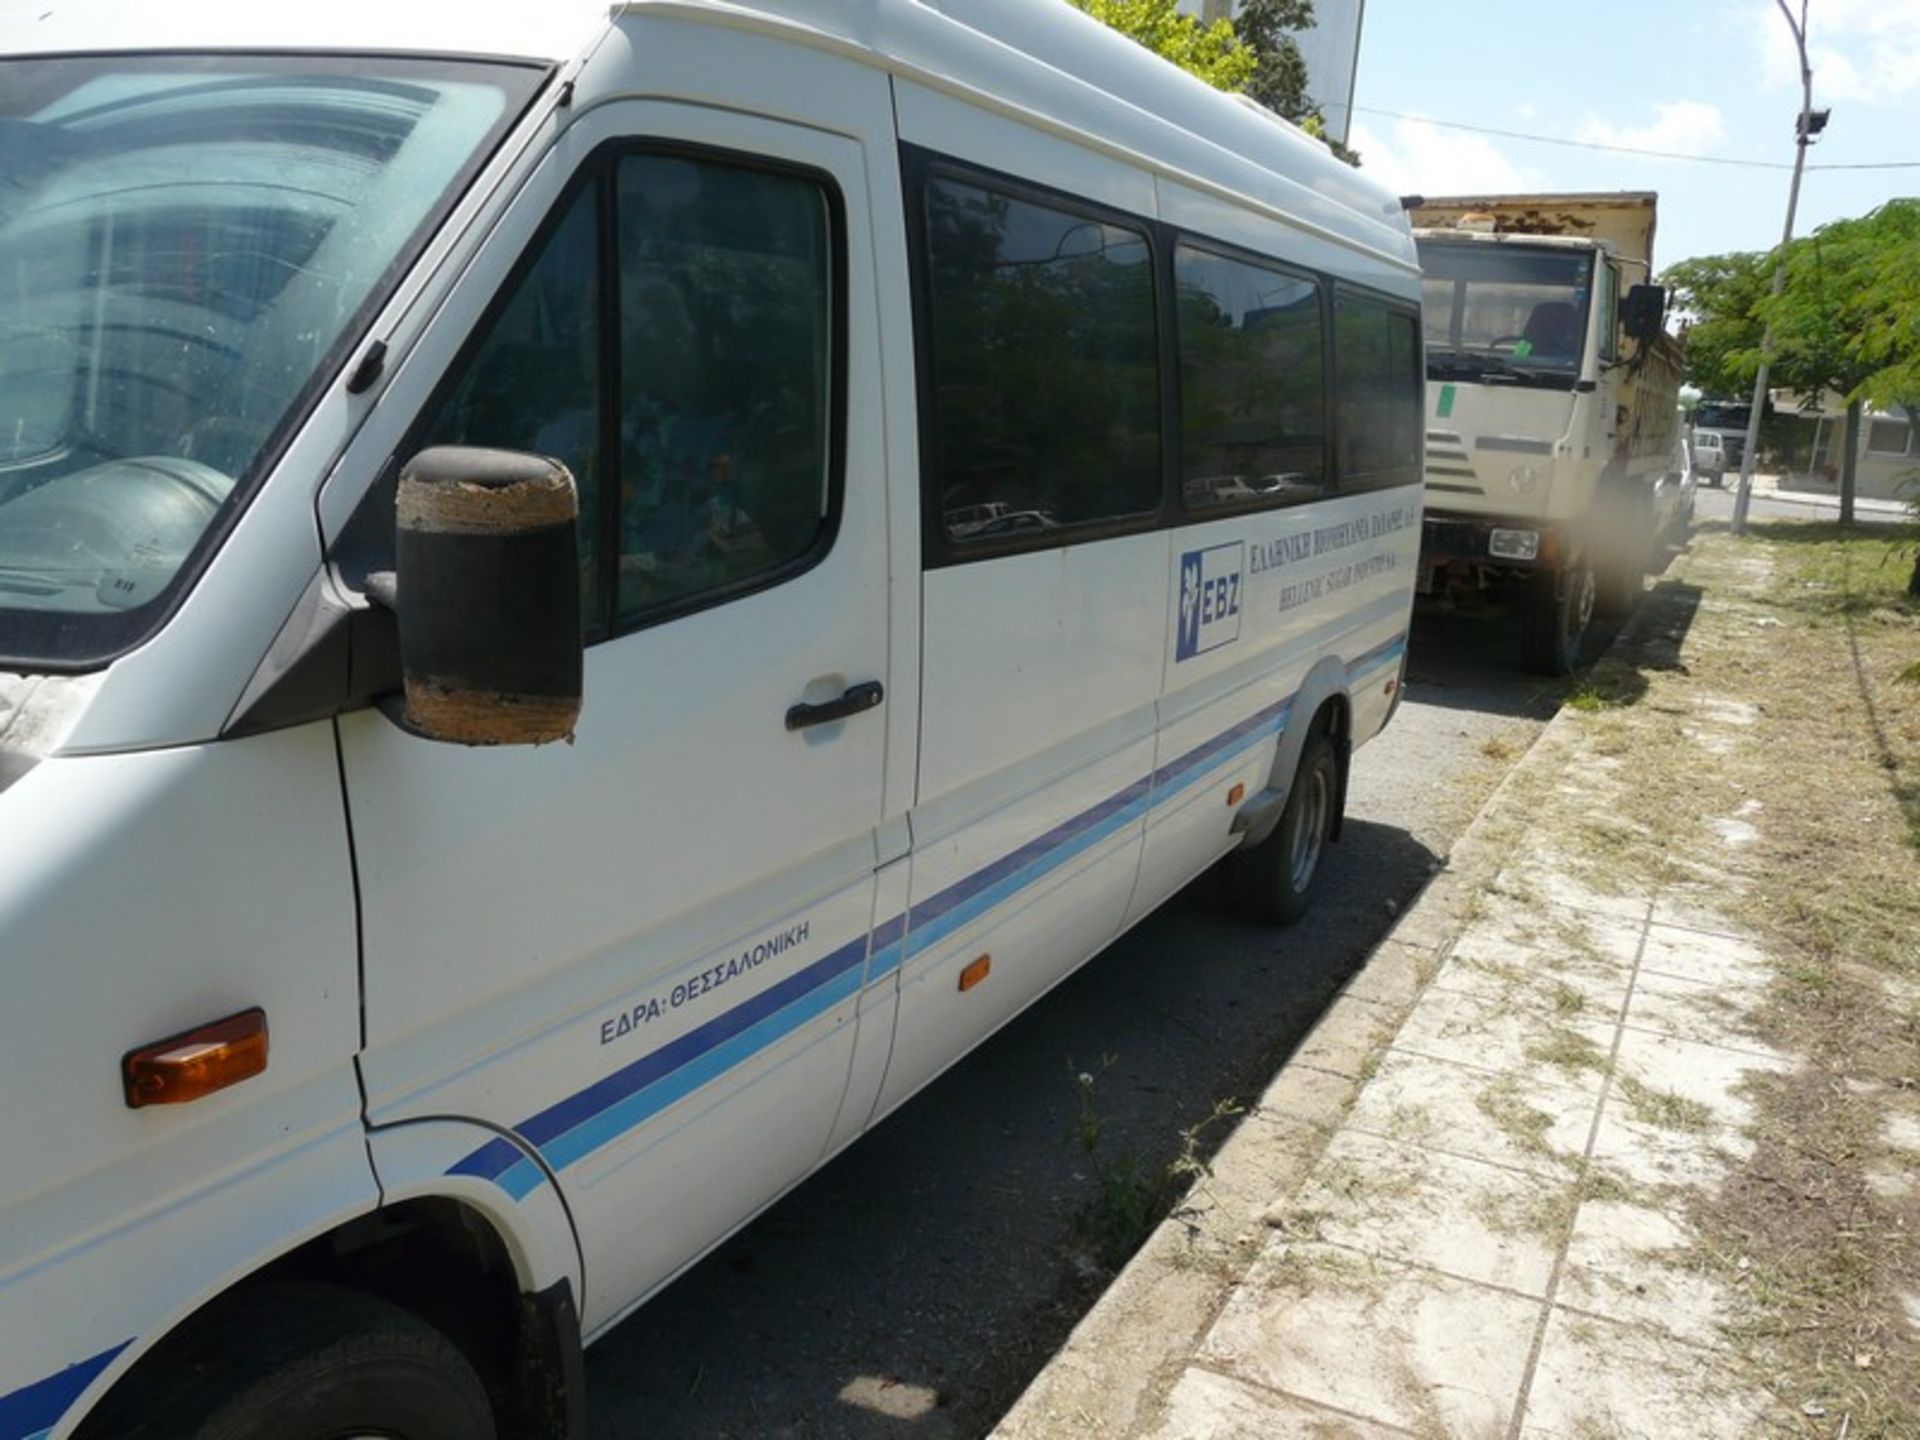 MERCEDES 413 CDI BUS, REG: NZK 2965, With automatic passager door , Seats: 17+1, KM: 125000 (Located - Image 3 of 12